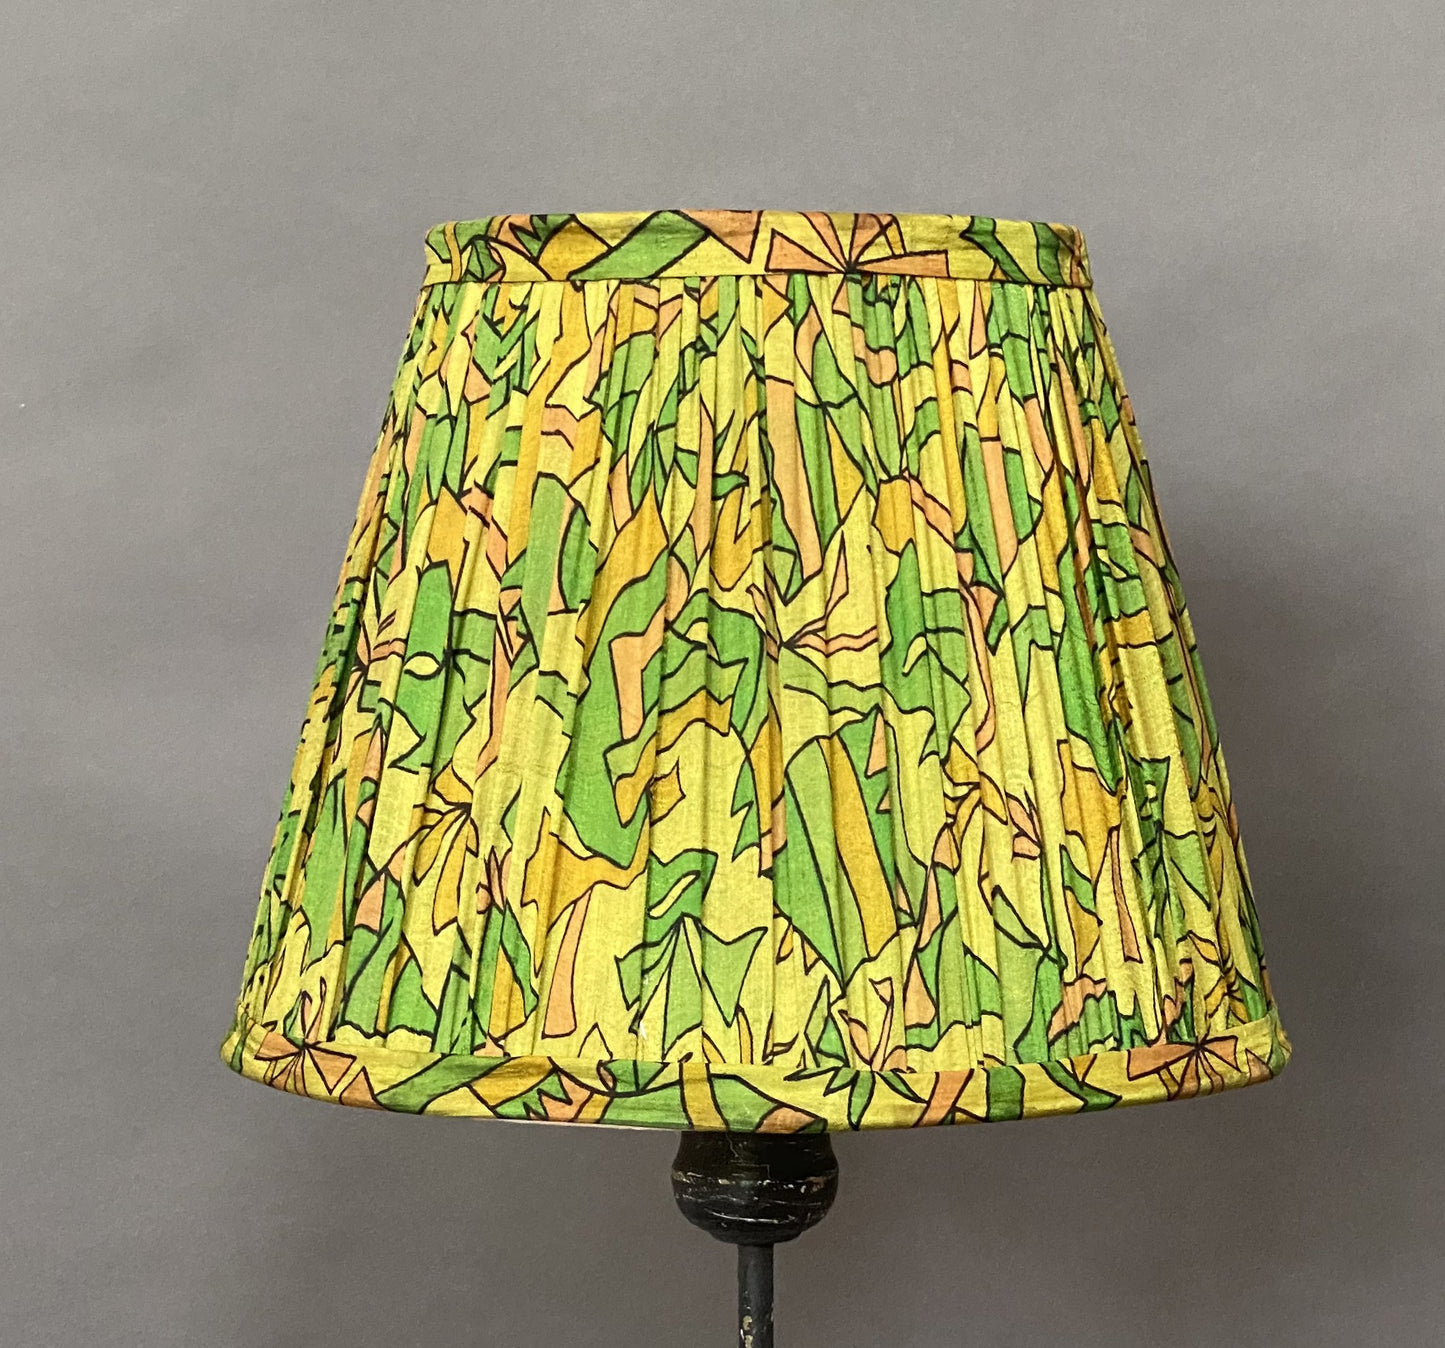 Green & citrine silk lampshade shown on a grey background